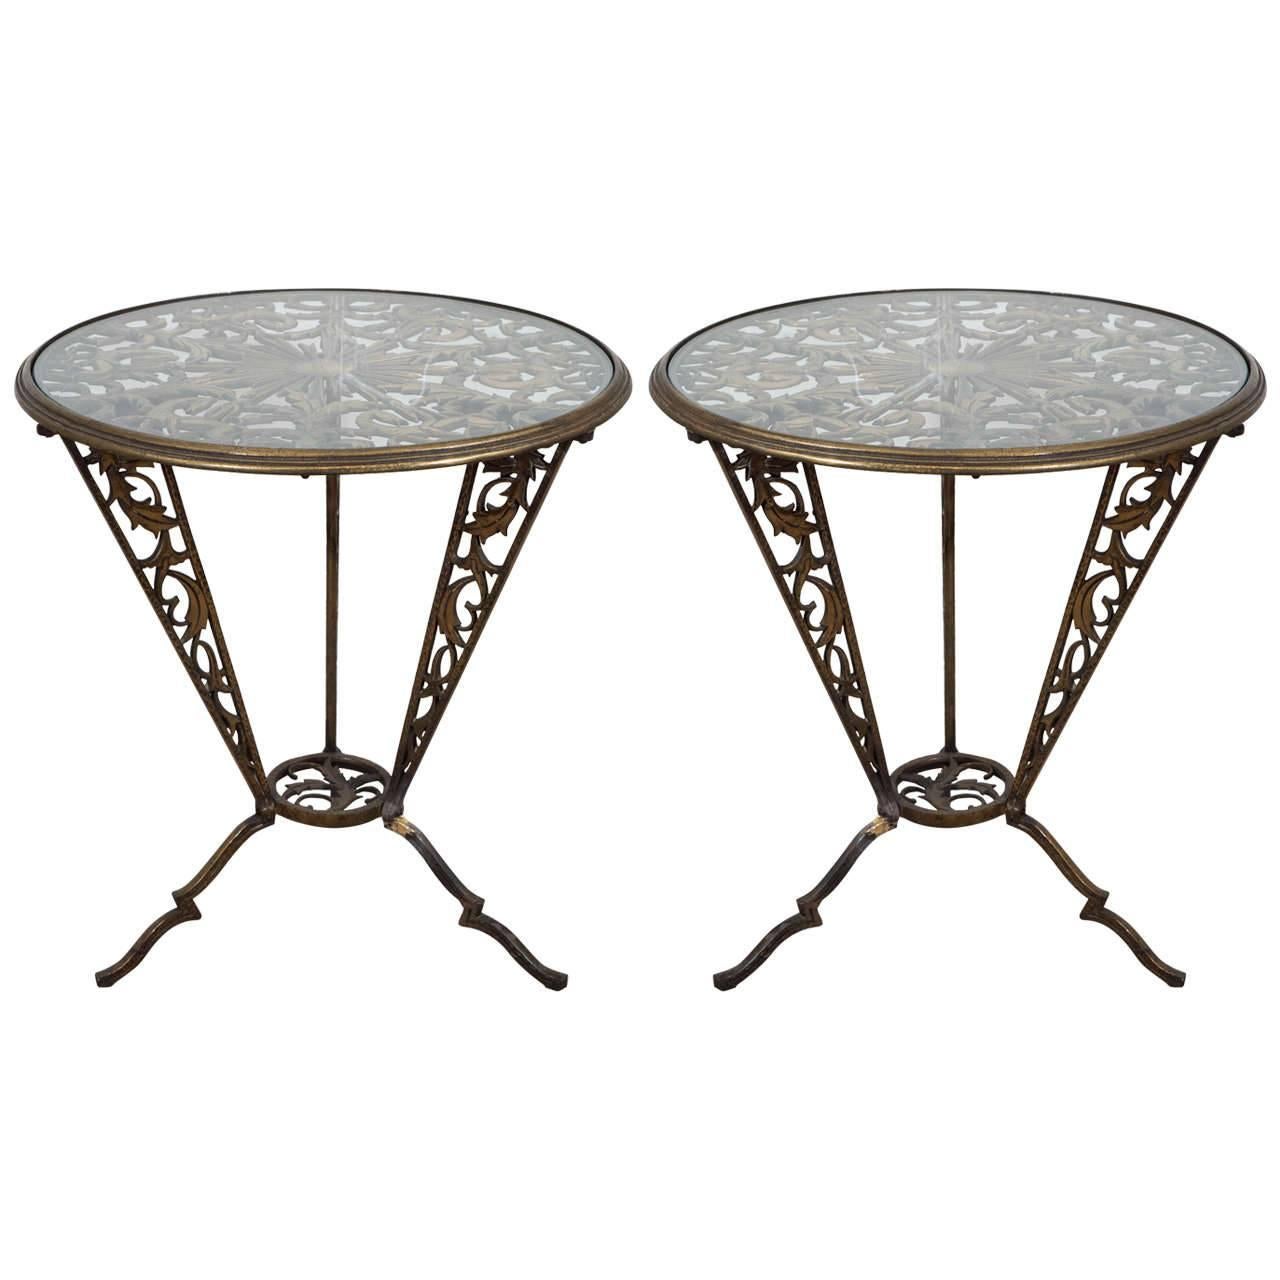  Beautiful Pair of Art Deco Rena Rosenthal Tables by Karl Hagenauer For Sale